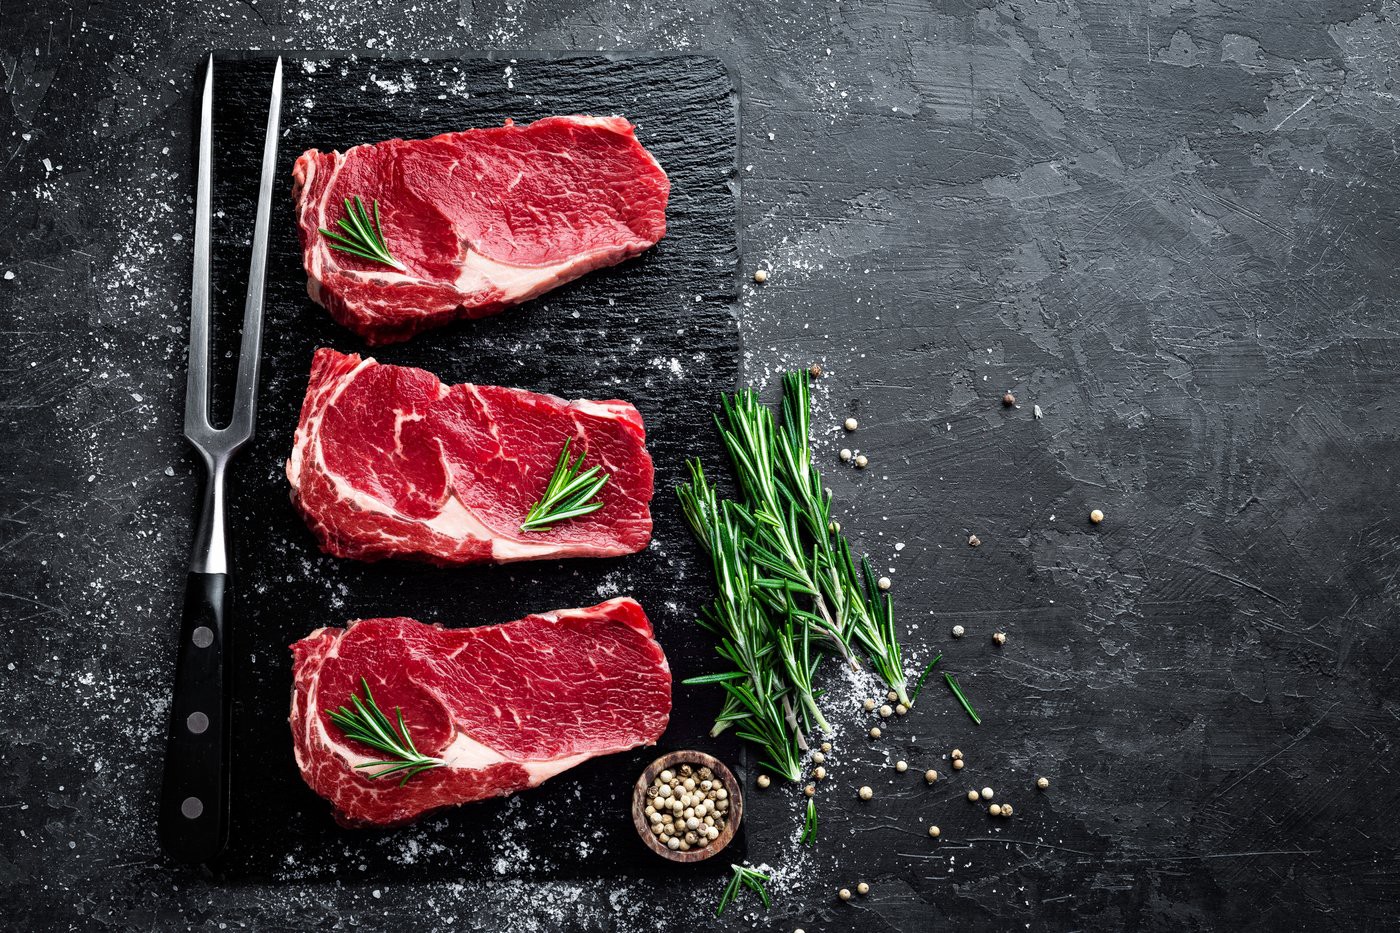 Three Important Factors to Consider When Choosing a Meat Supplier